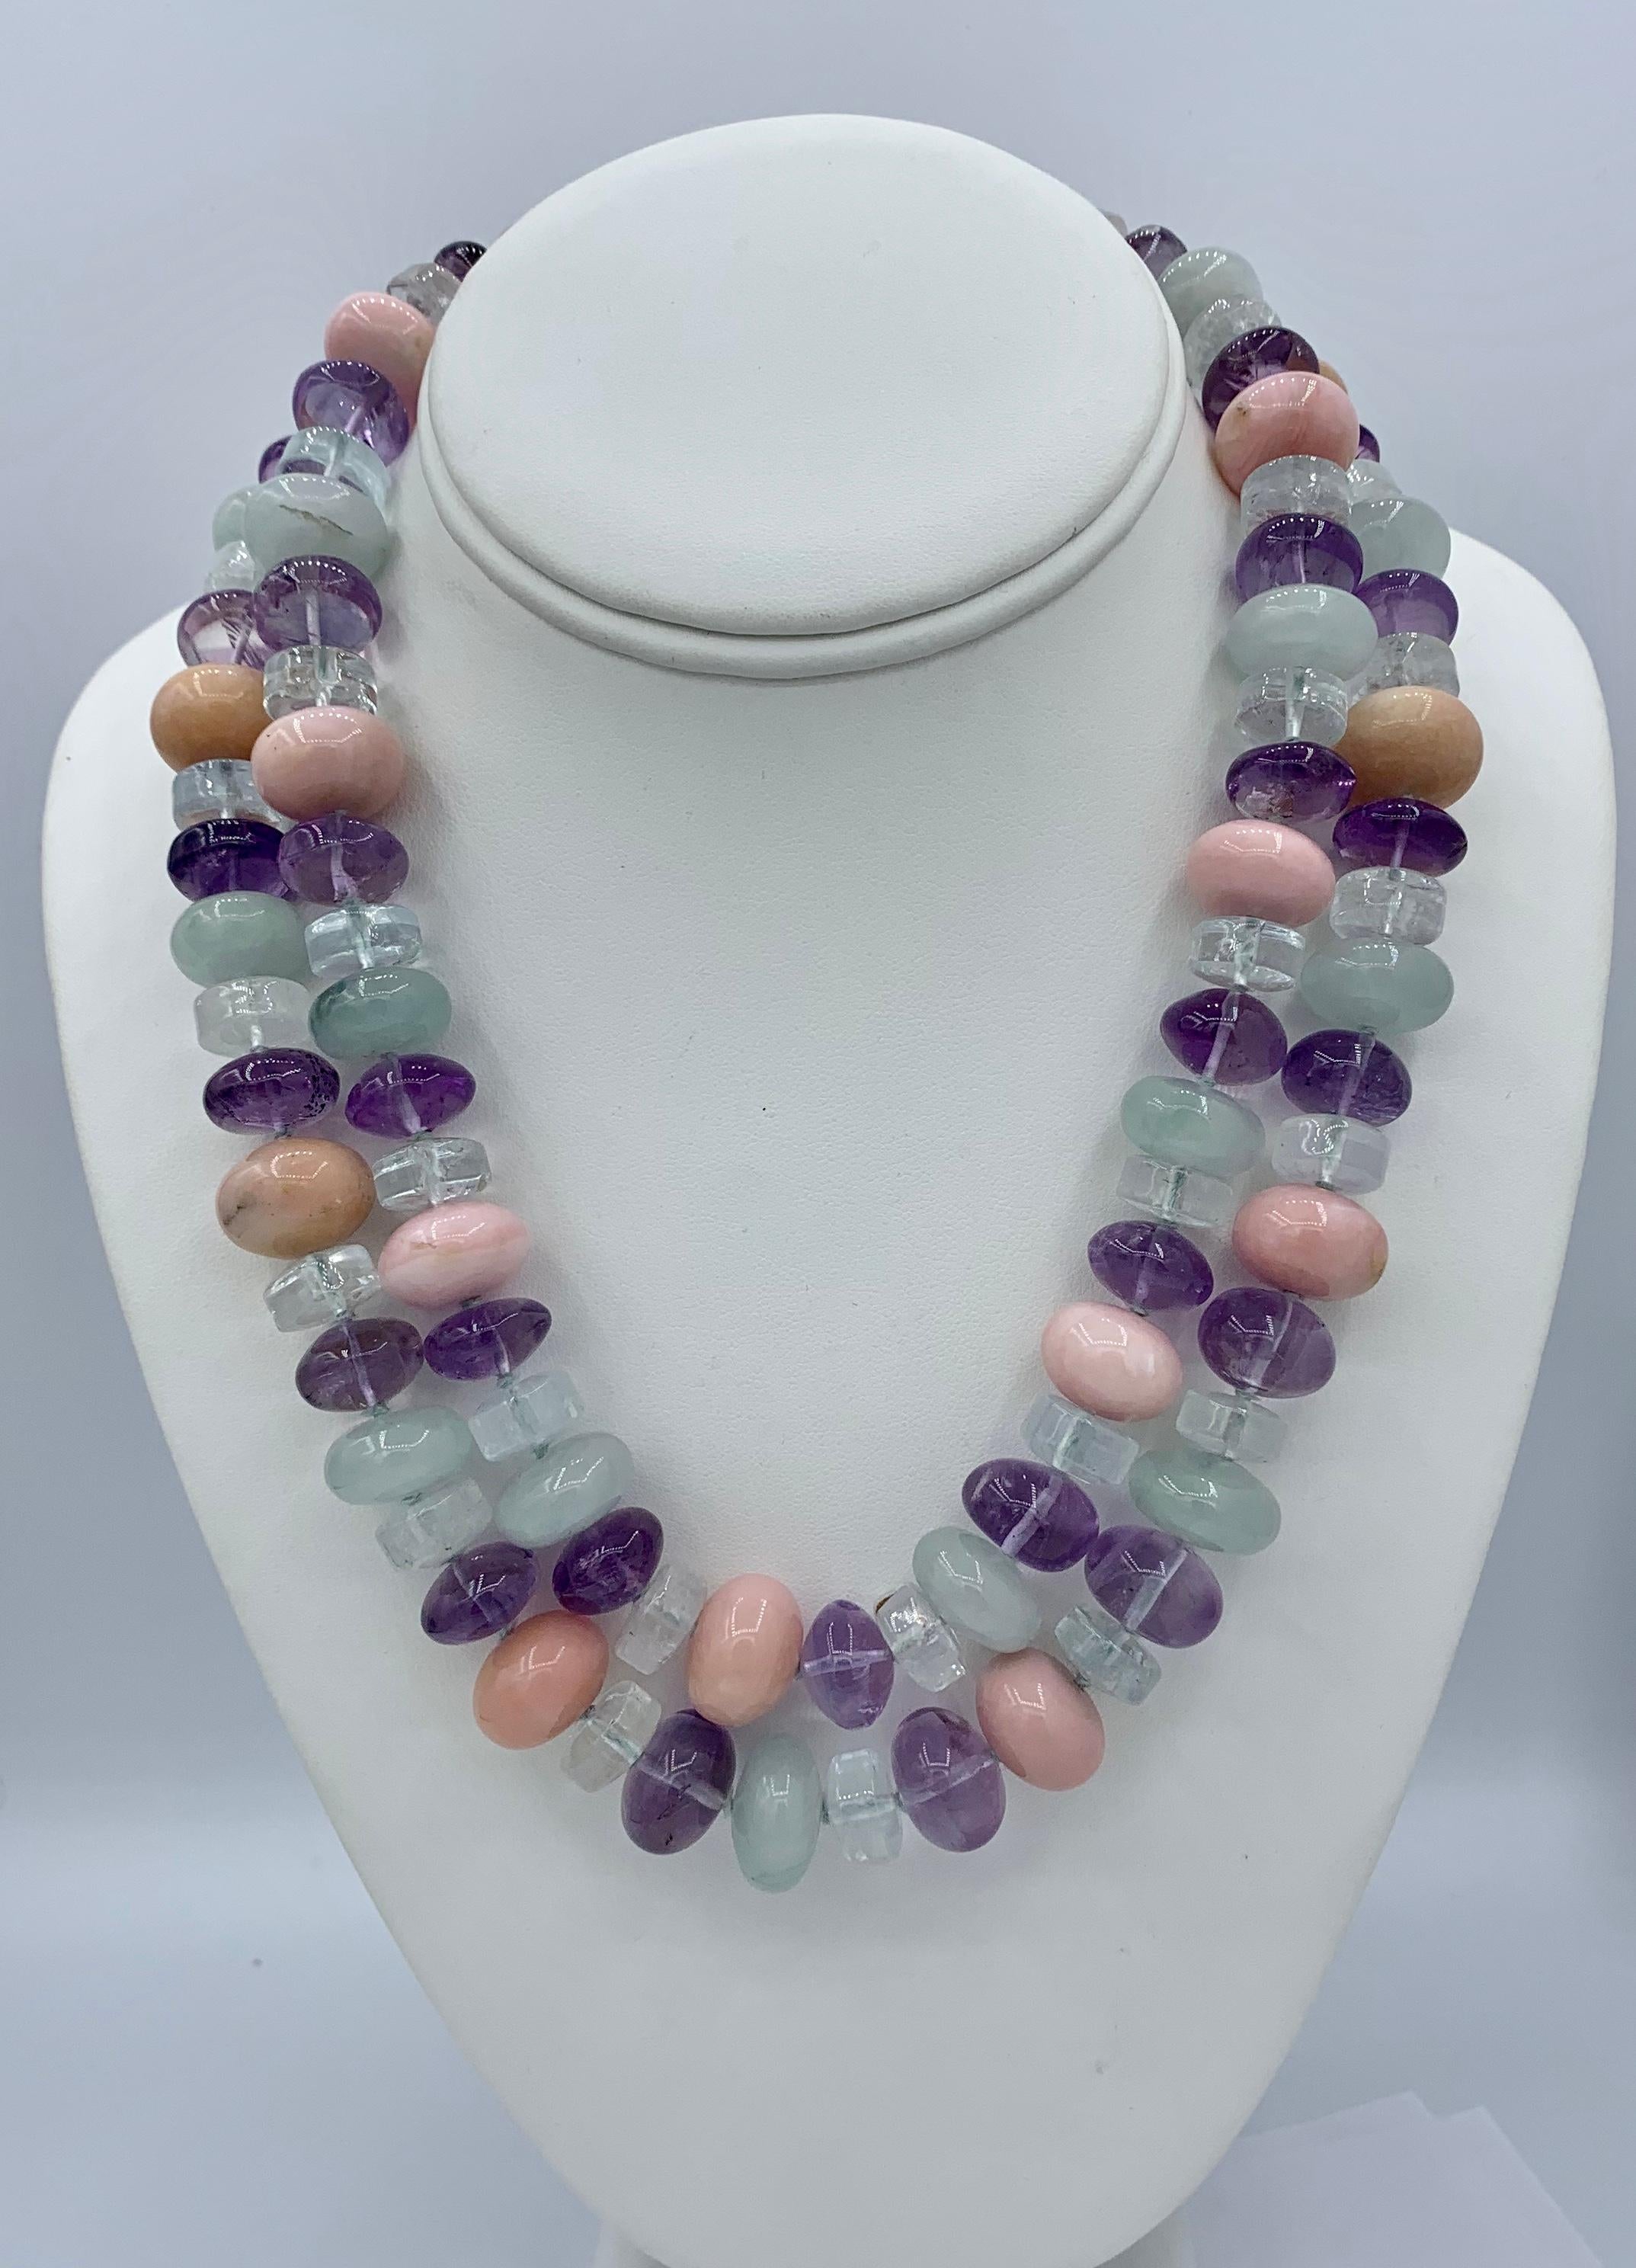 This is a spectacular Gem Set Necklace composed of two strands of beautiful natural Rock Crystal, Amethyst, Opal and Jadeite beads.  The necklace is guaranteed to be from the estate of the legendary British writer Barbara Taylor Bradford OBE.  The